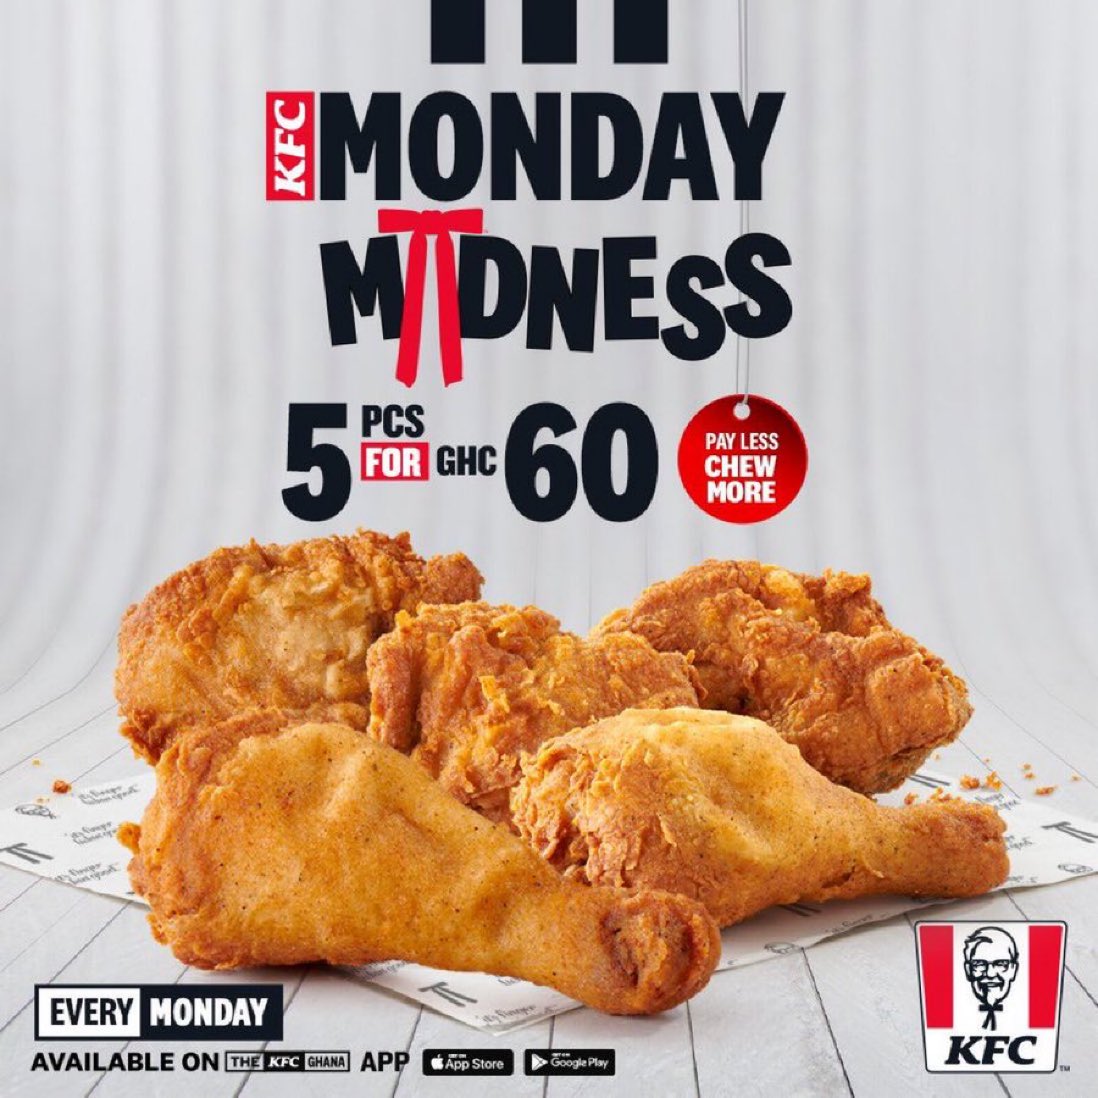 The greatest deal on chicken ever! 🍗 💯 Take advantage of KFC Monday Madness today and purchase five pieces of chicken for just GH¢60. ORDER ONLINE 🍗🔗 : bit.ly/42FKaPV #KFCMondayMadness